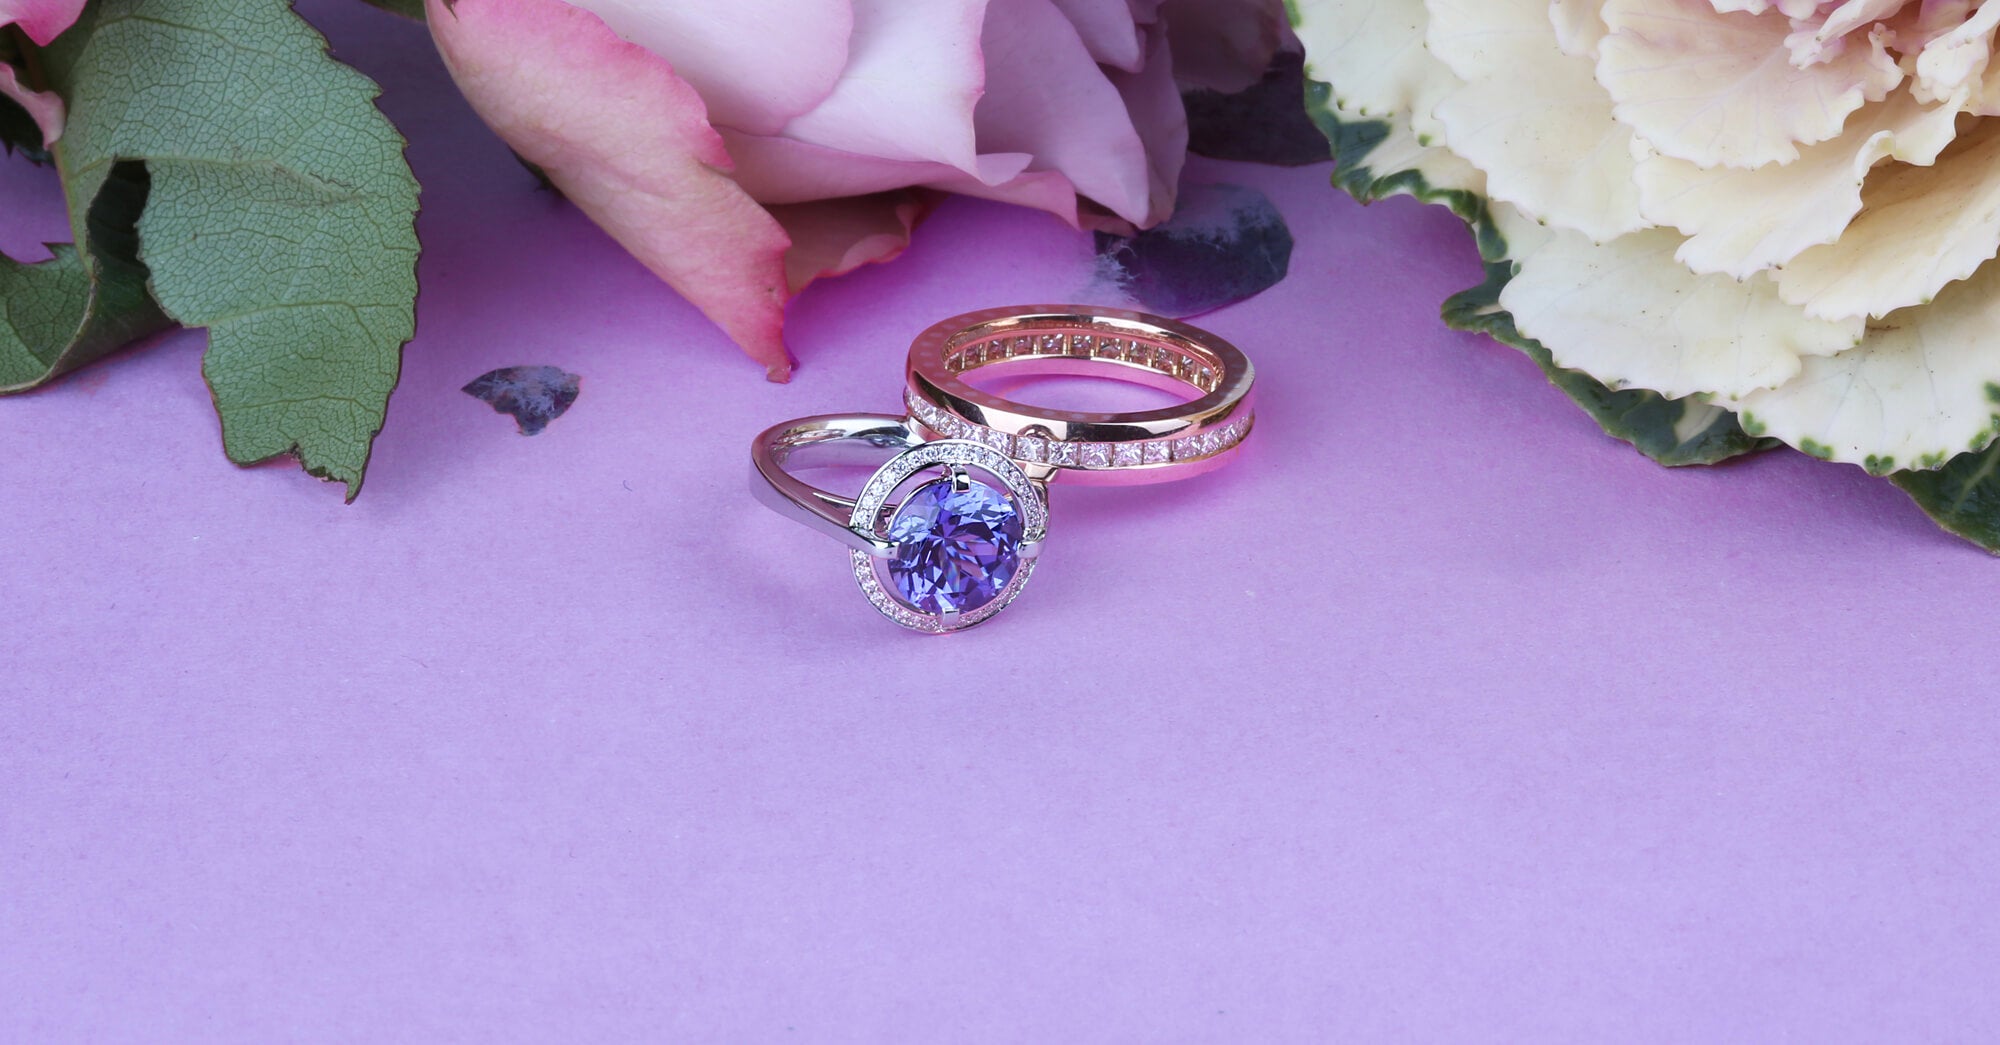 A white gold ring set with a large round brilliant cut tanzanite surrounded by pavé set diamonds sits next to a rose gold diamond set eternity ring